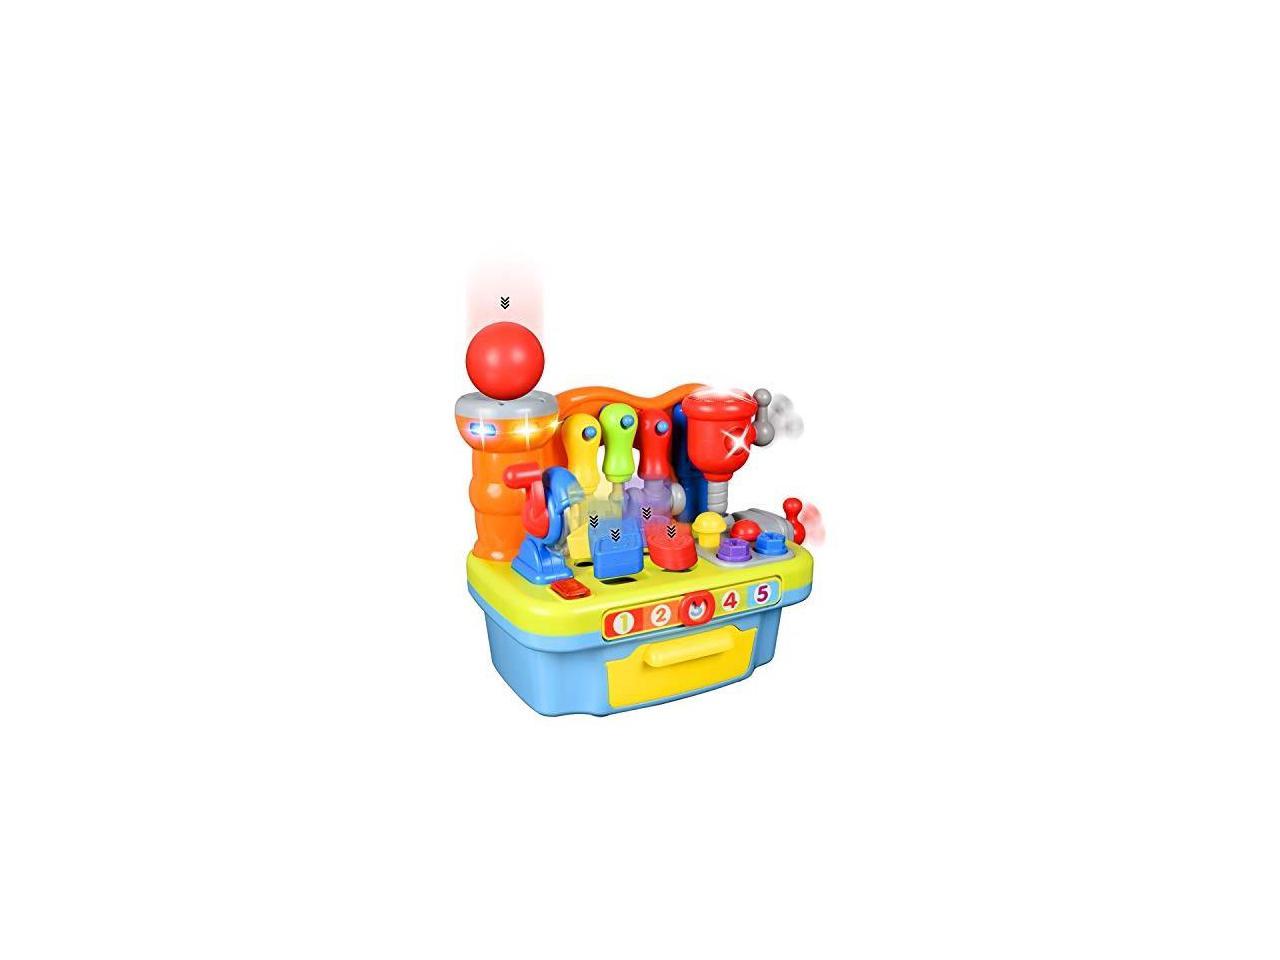 wolvol musical learning workbench toy with tools, engineering 